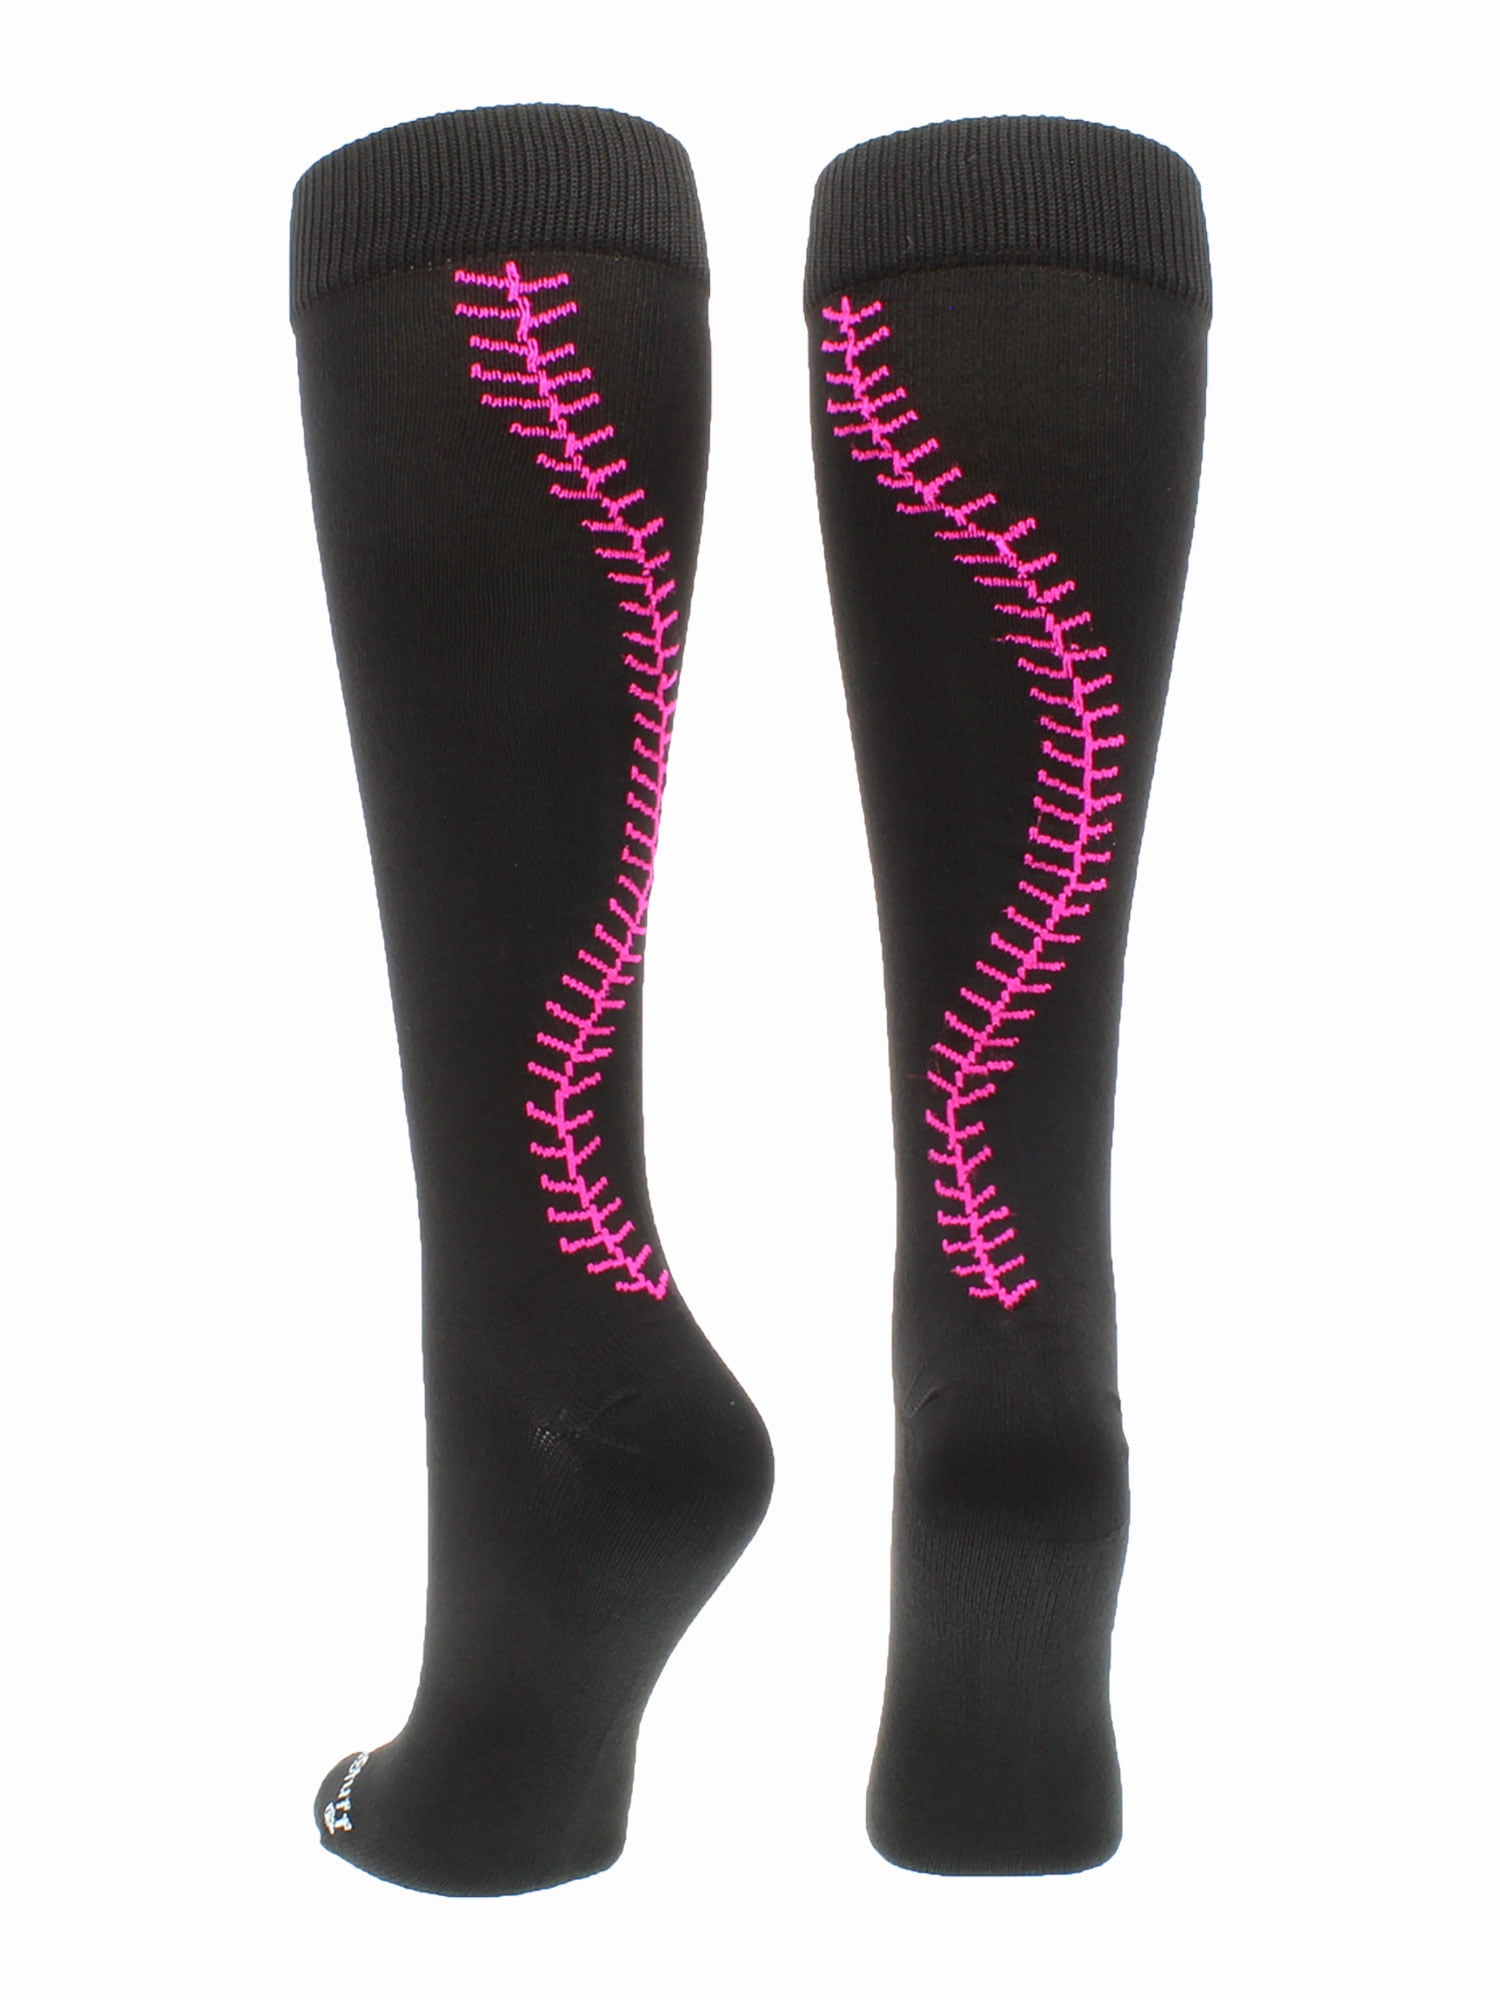 MadSportsStuff Softball Socks with Stitches Knee High Length for Girls or Women 